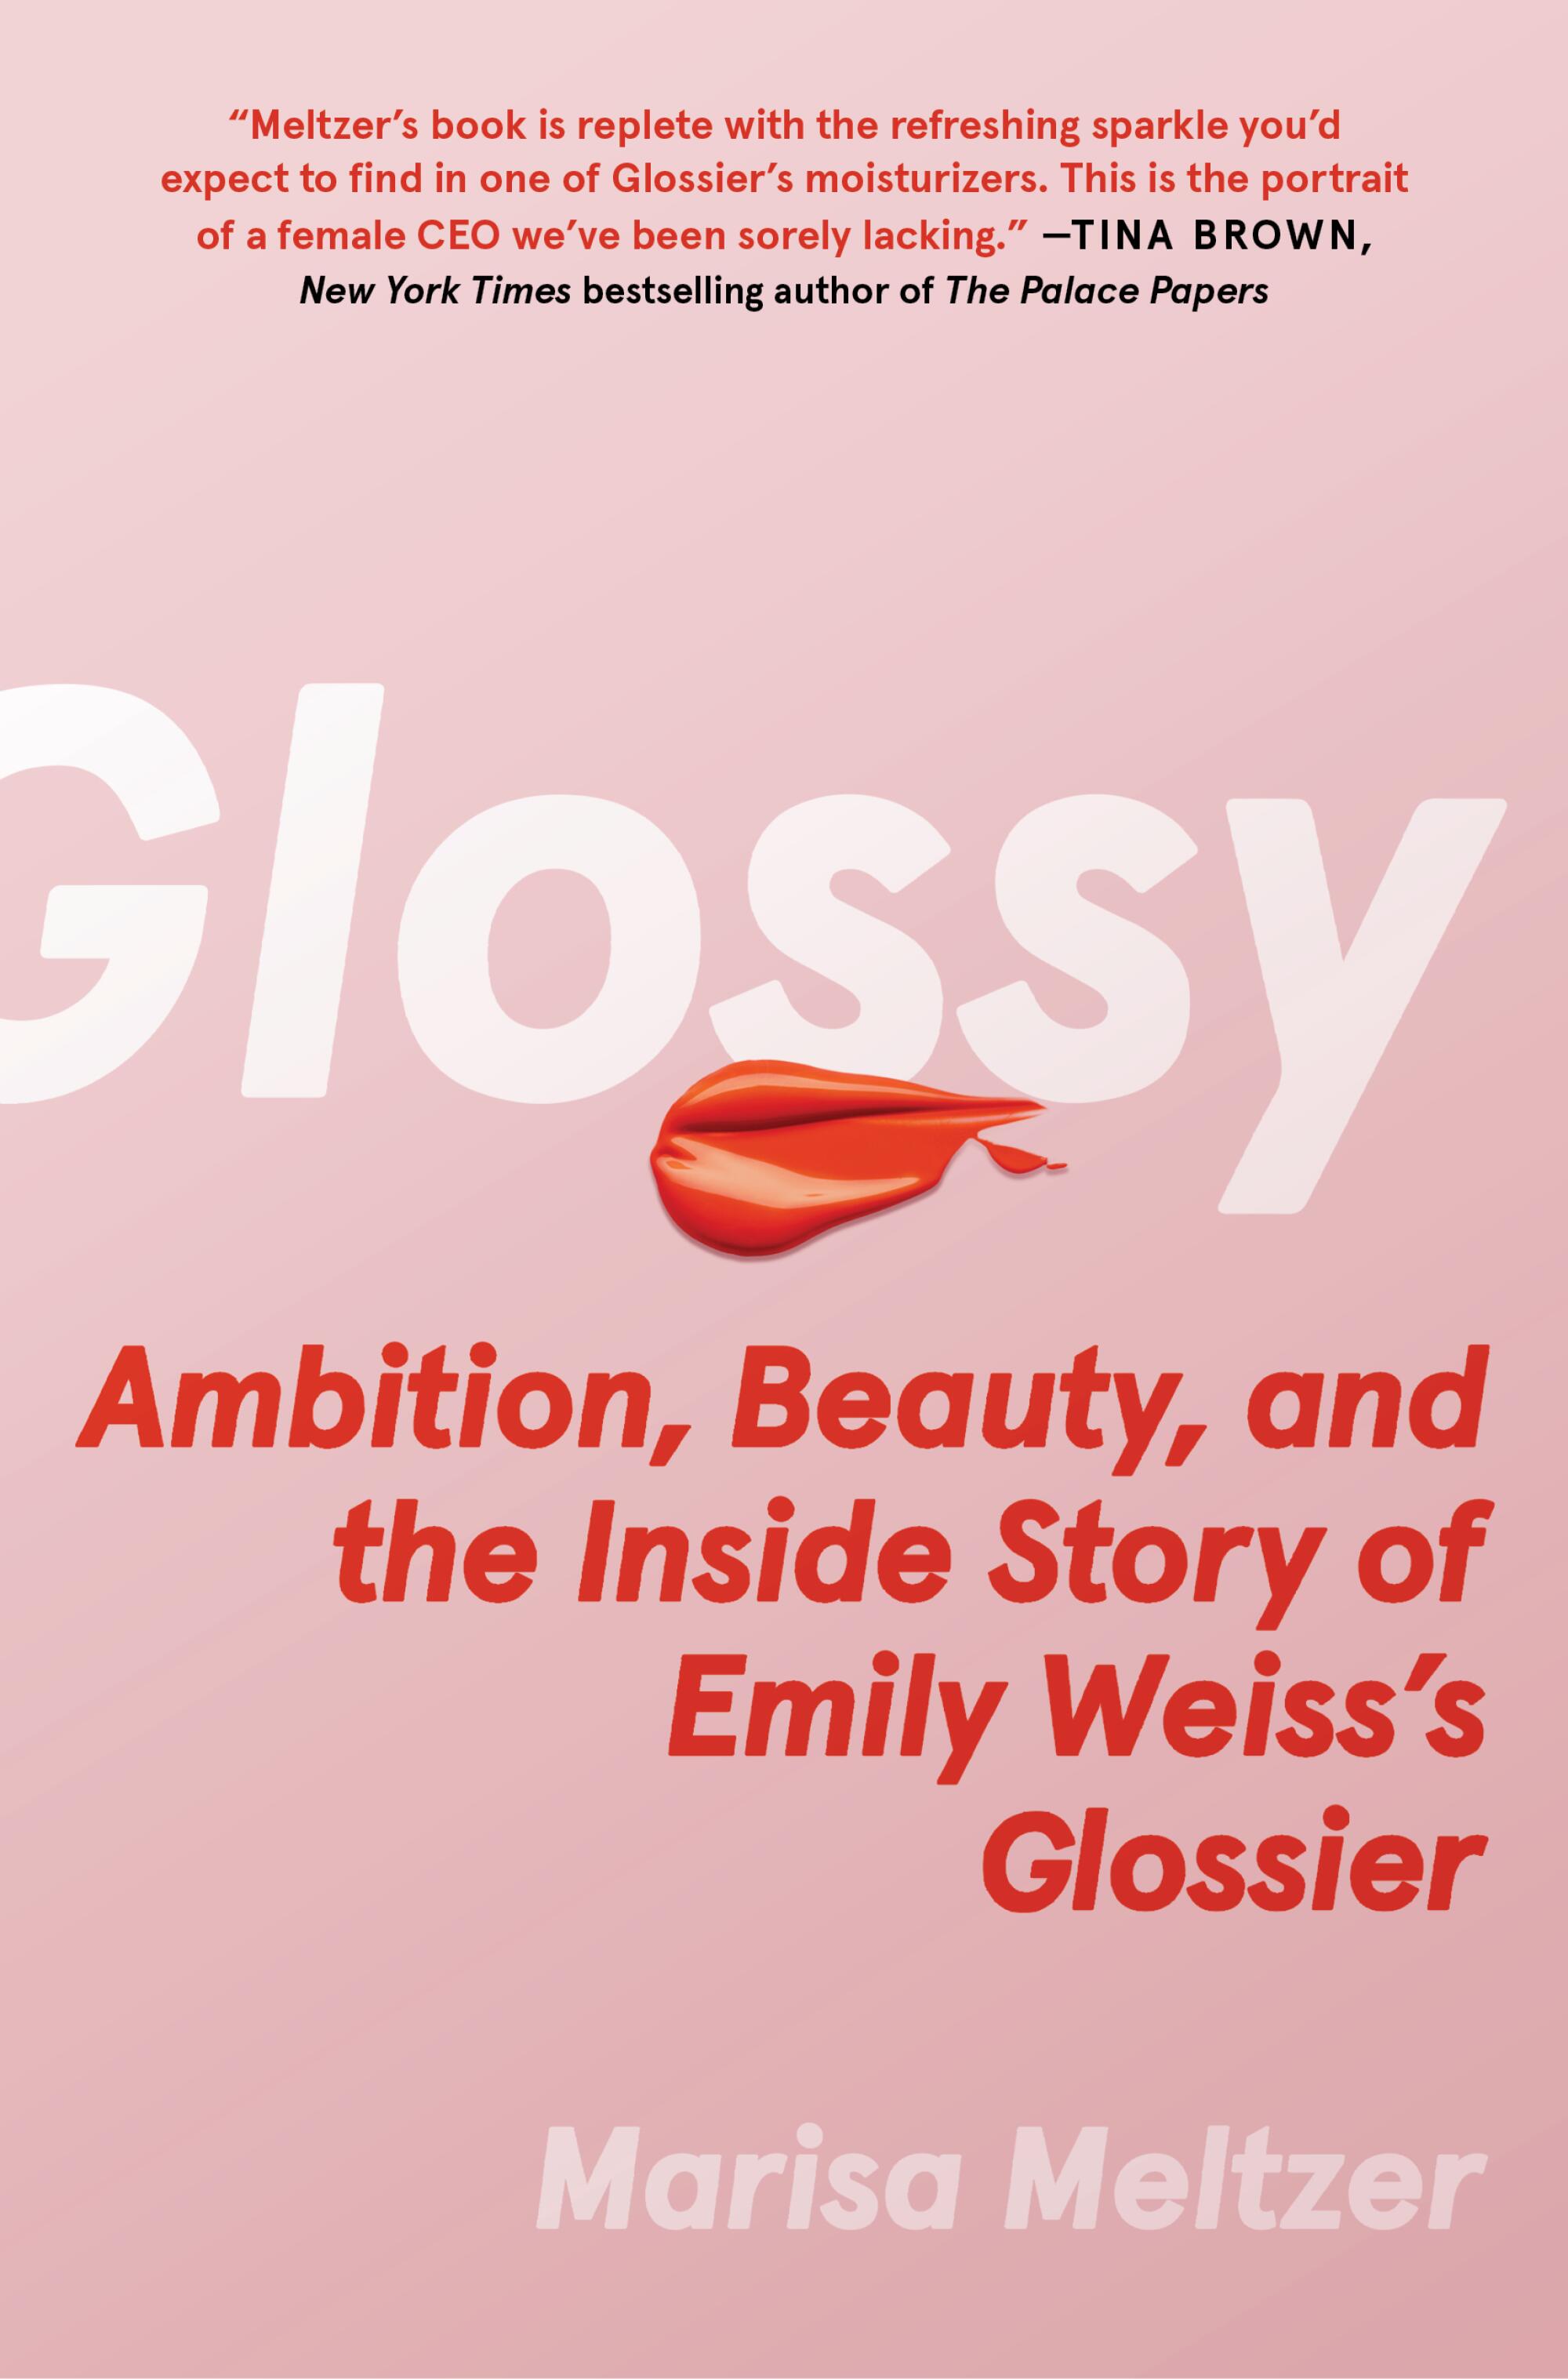 Book cover of "Glossy" by Marisa Meltzer